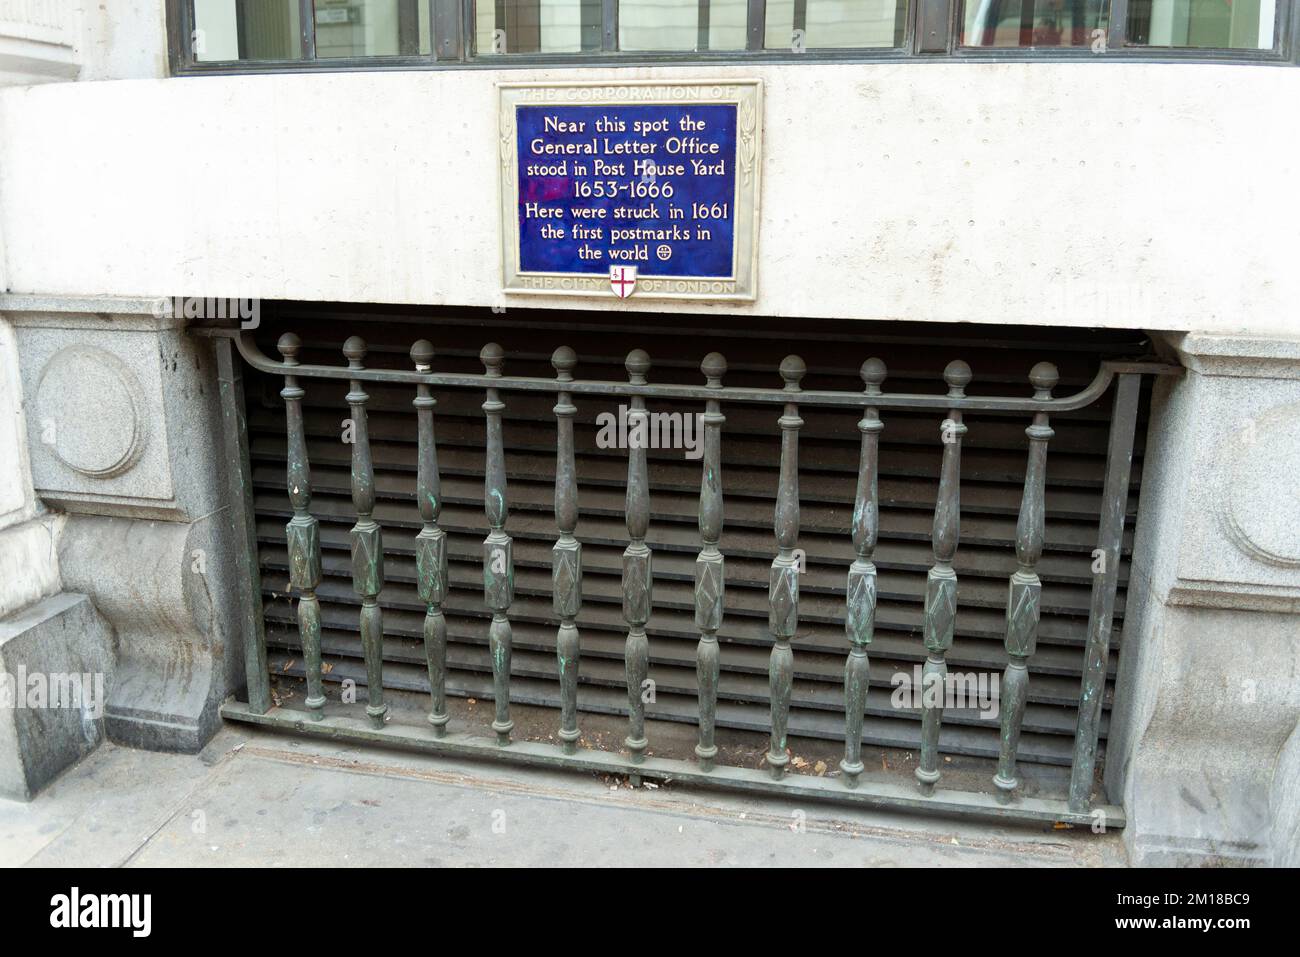 Site of first postmark in the world plaque. Near this spot the General Letter Office stood in Post House Yard 1653-1666, in the City of London, UK. Stock Photo